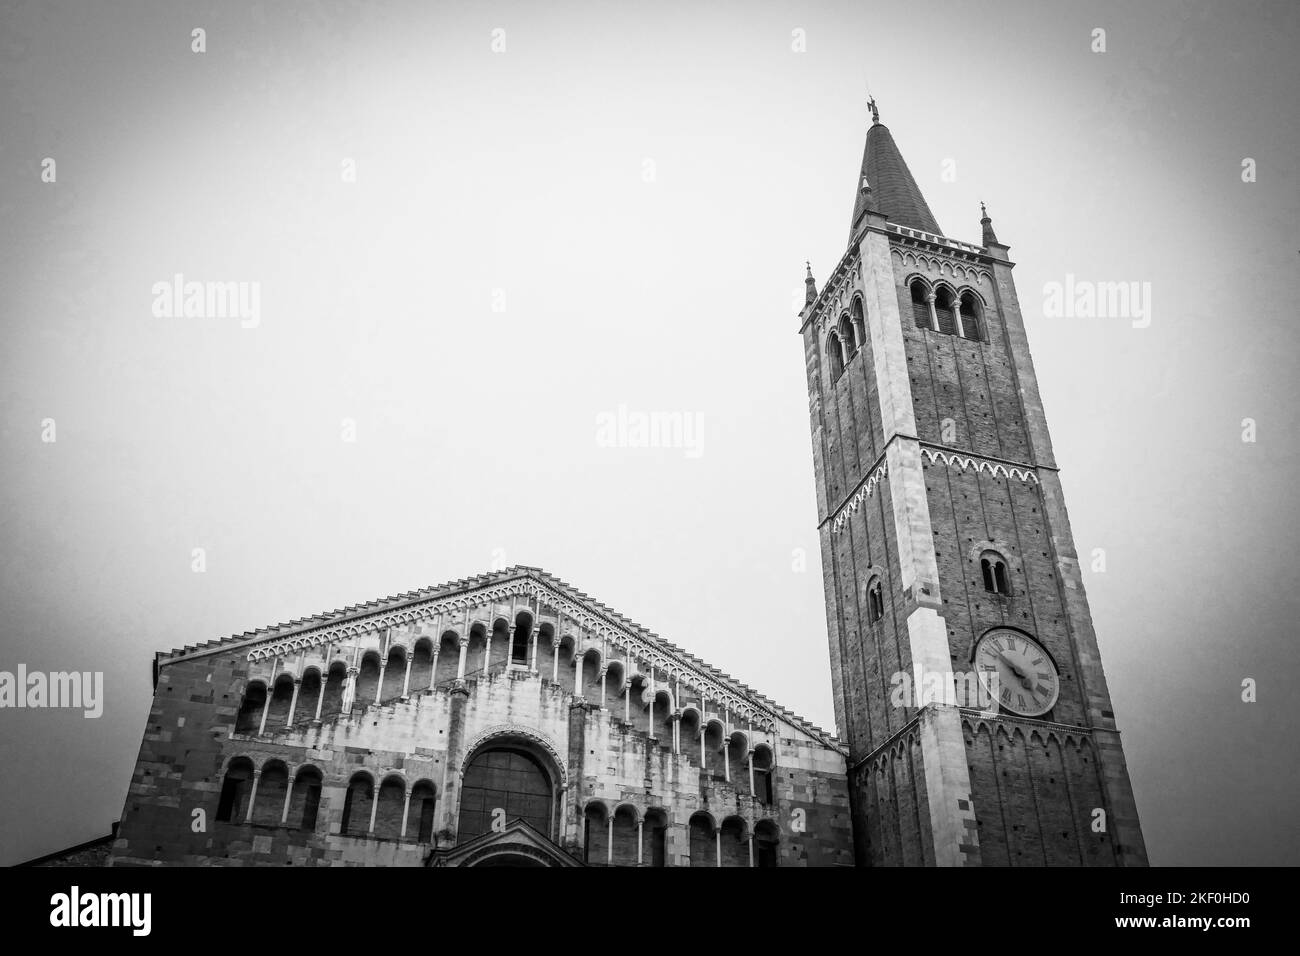 Die Kathedrale von Parma, Cattedrale di Parma, in Italien, bei Tag Stockfoto